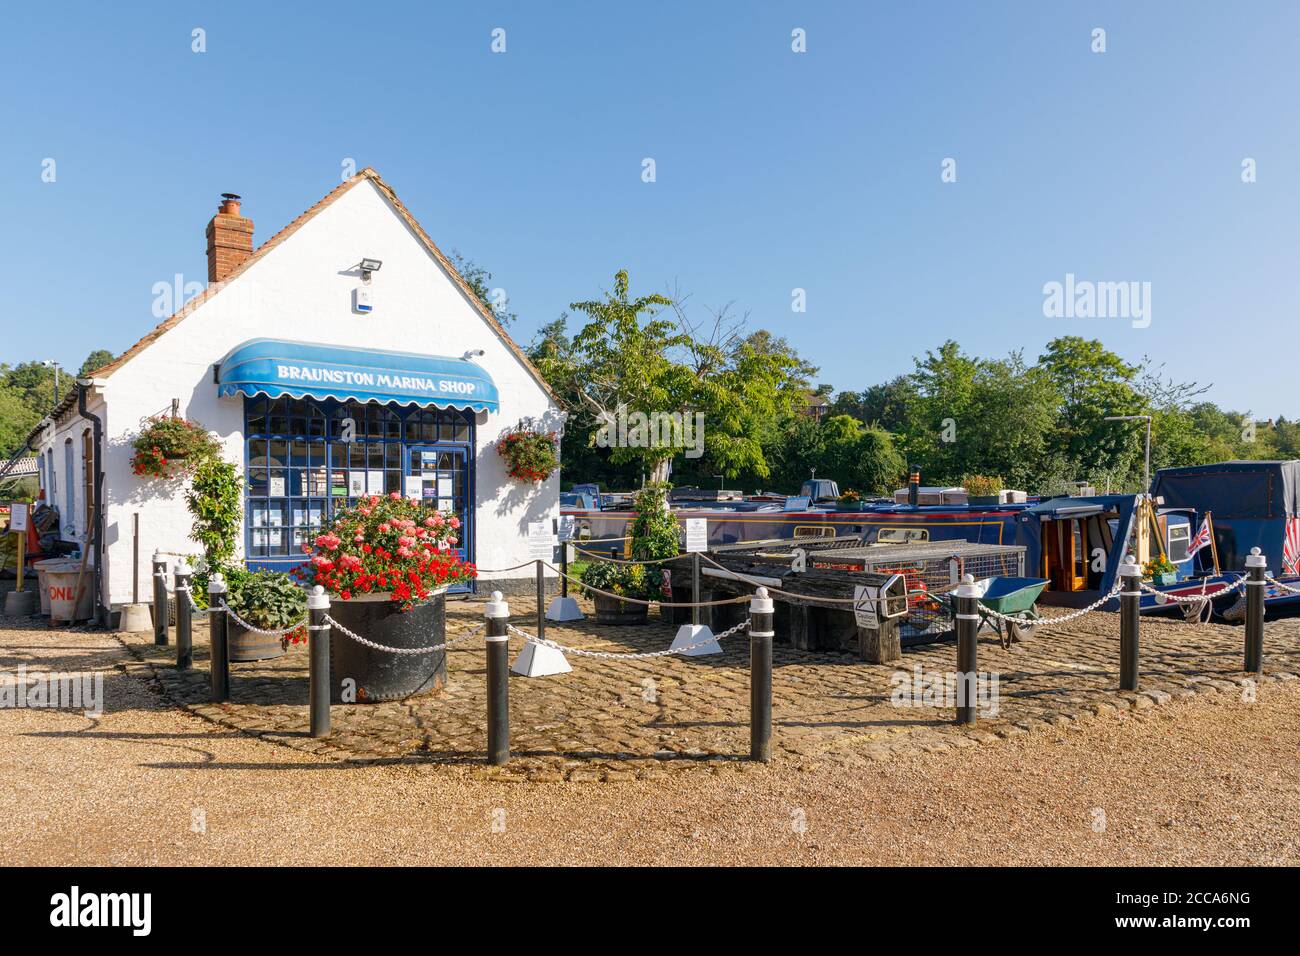 Braunston, Northamptonshire, UK - 20/08/20: Braunston Marina shop sells items for boaters using the nearby Grand Union and Oxford canals. Stock Photo